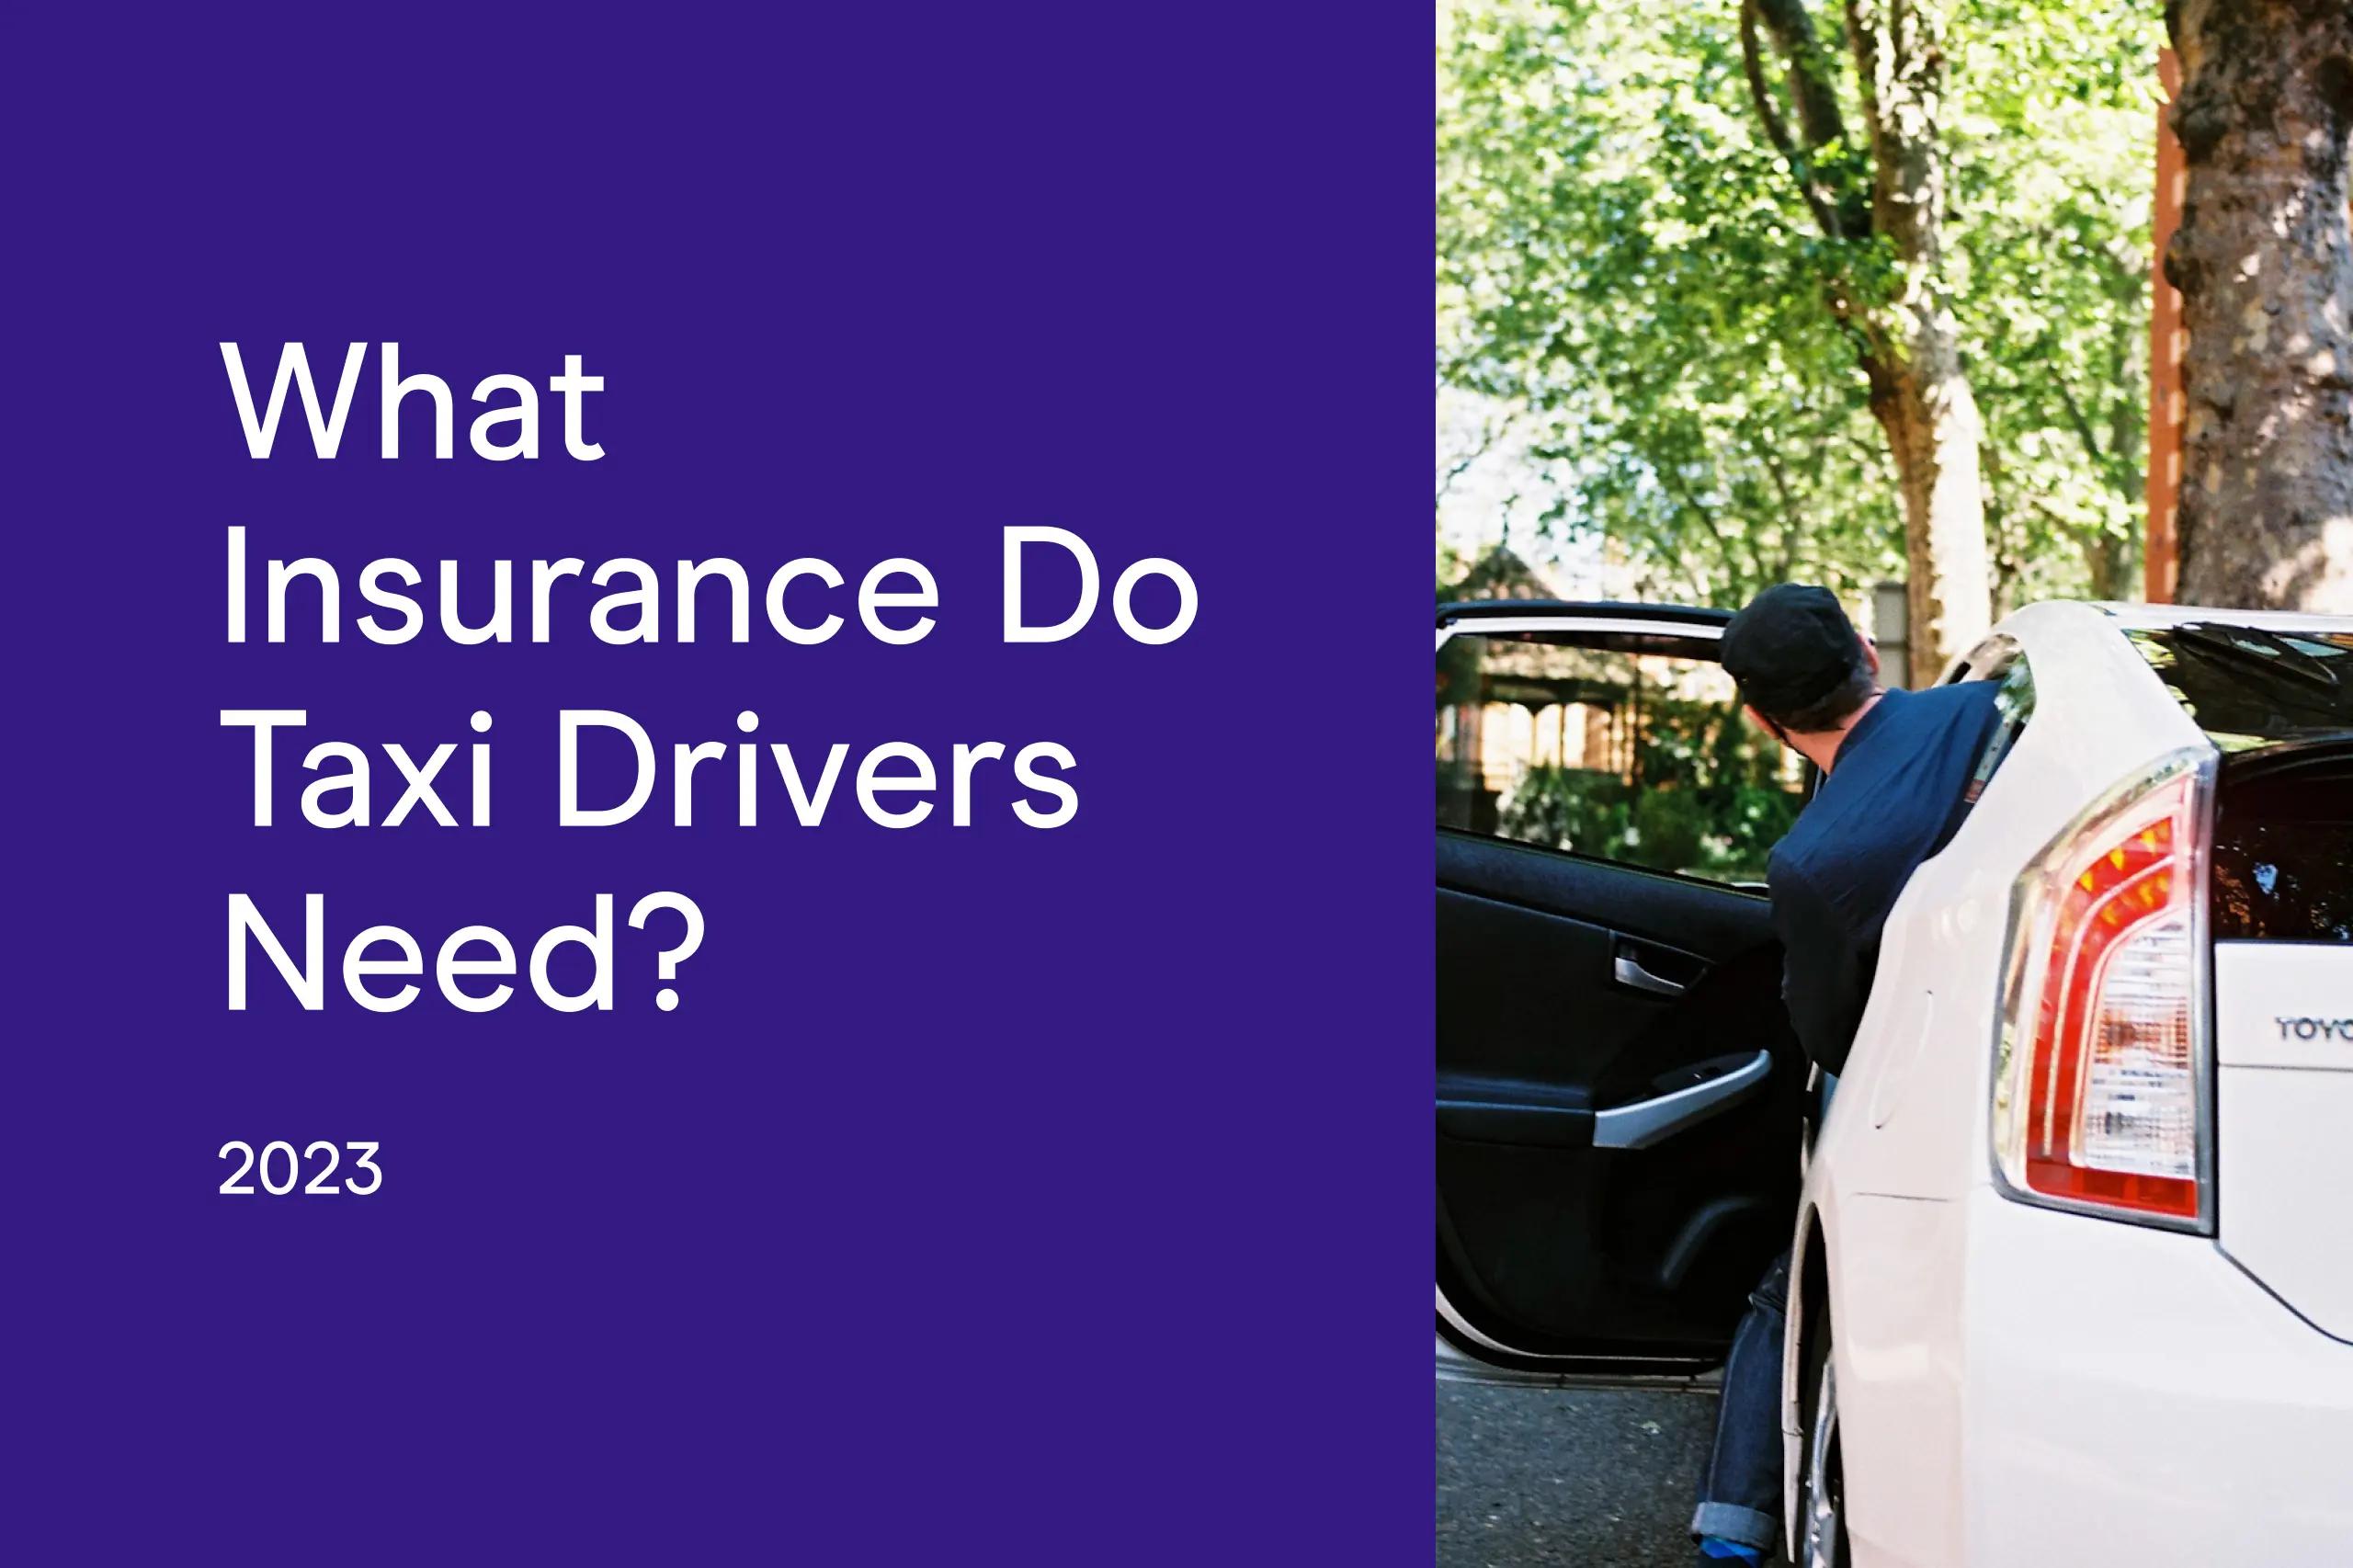 cheap taxi insurance - What insurance do I need for PCO